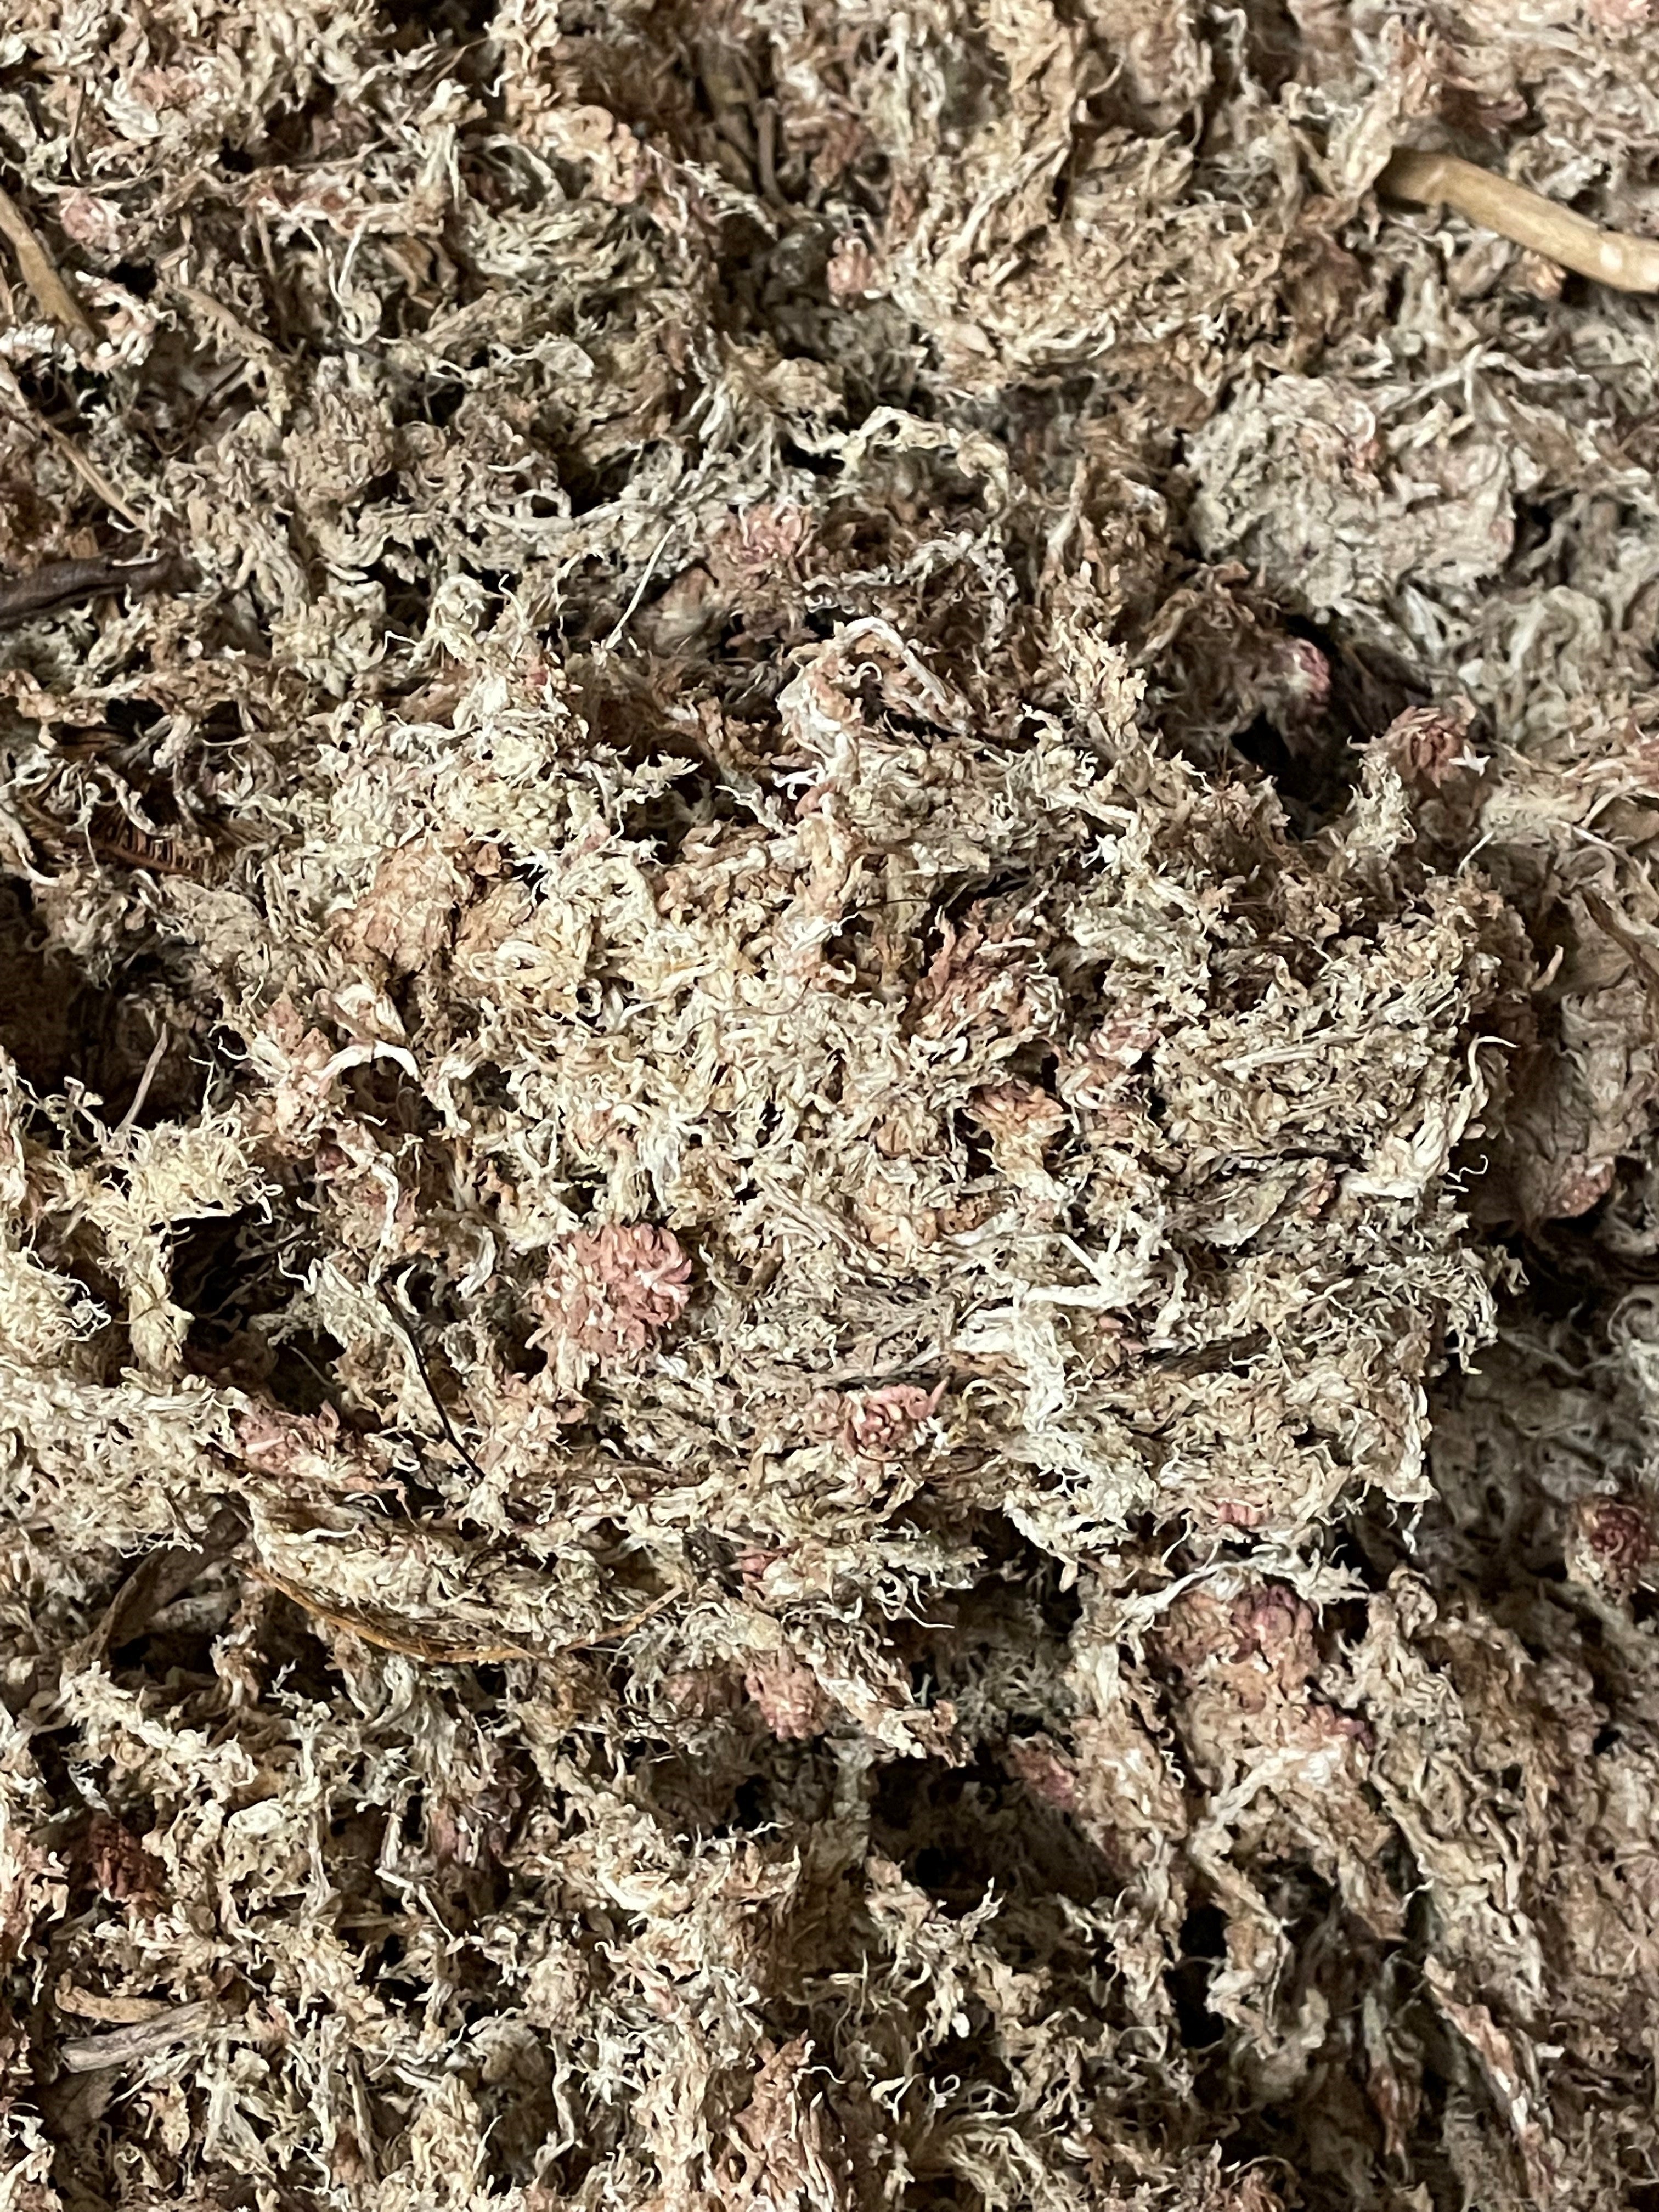 Buy Sphagnum Moss for sale | 20% Retail